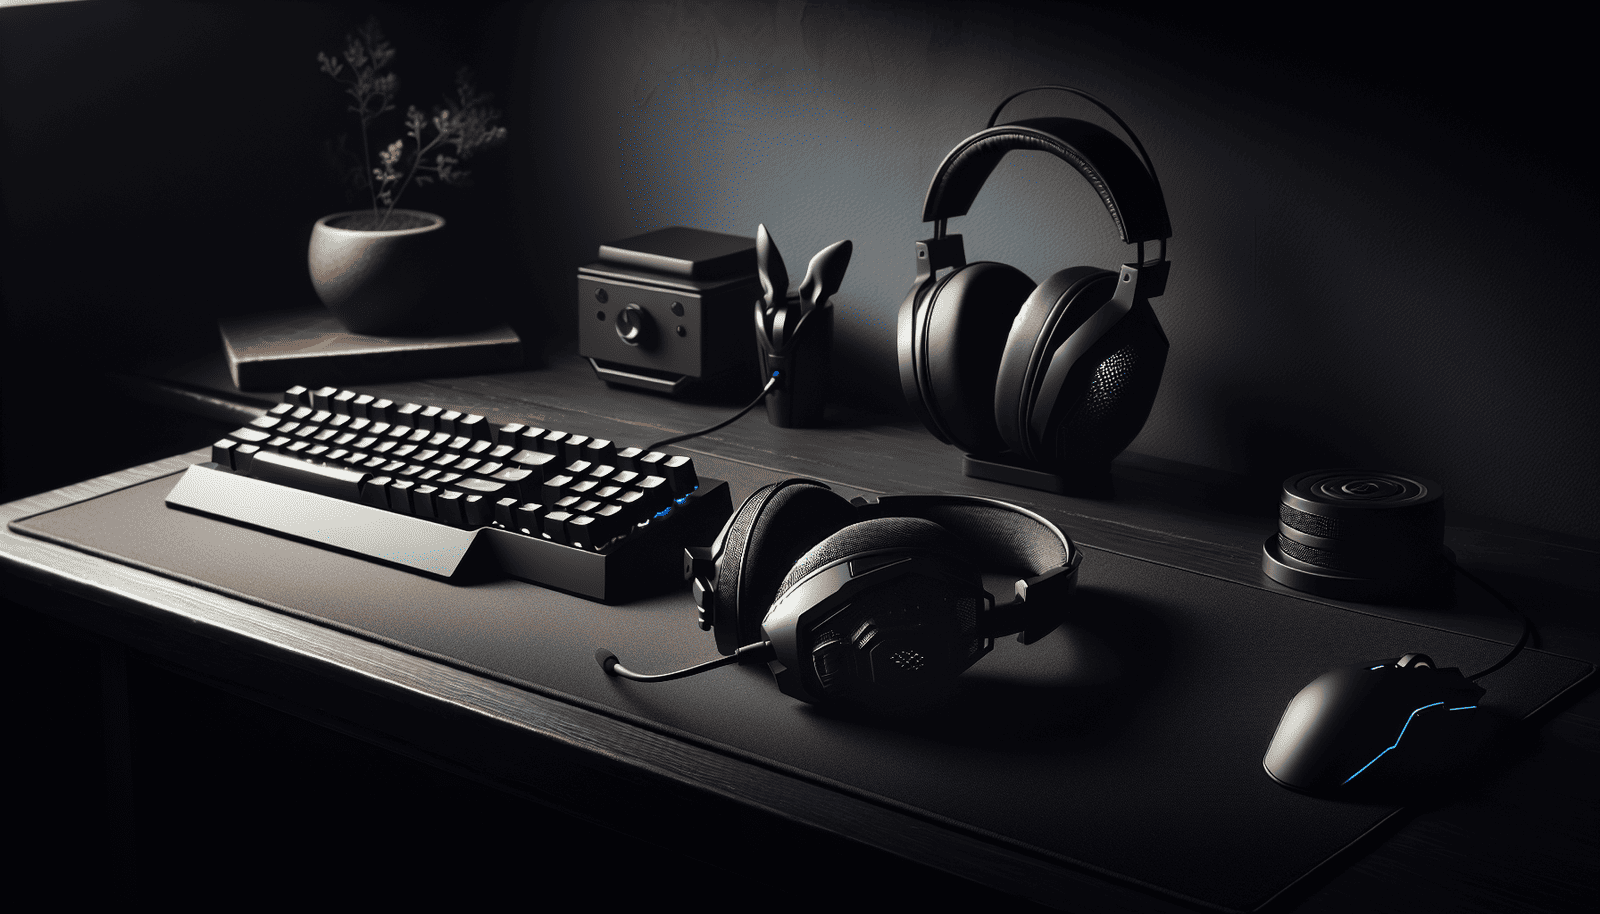 Must-Have Gaming Accessories such as HyperX Cloud II Wireless Gaming Headset, Razer DeathAdder Essential Gaming Mouse, and SteelSeries Apex 5 Hybrid Mechanical Gaming Keyboard